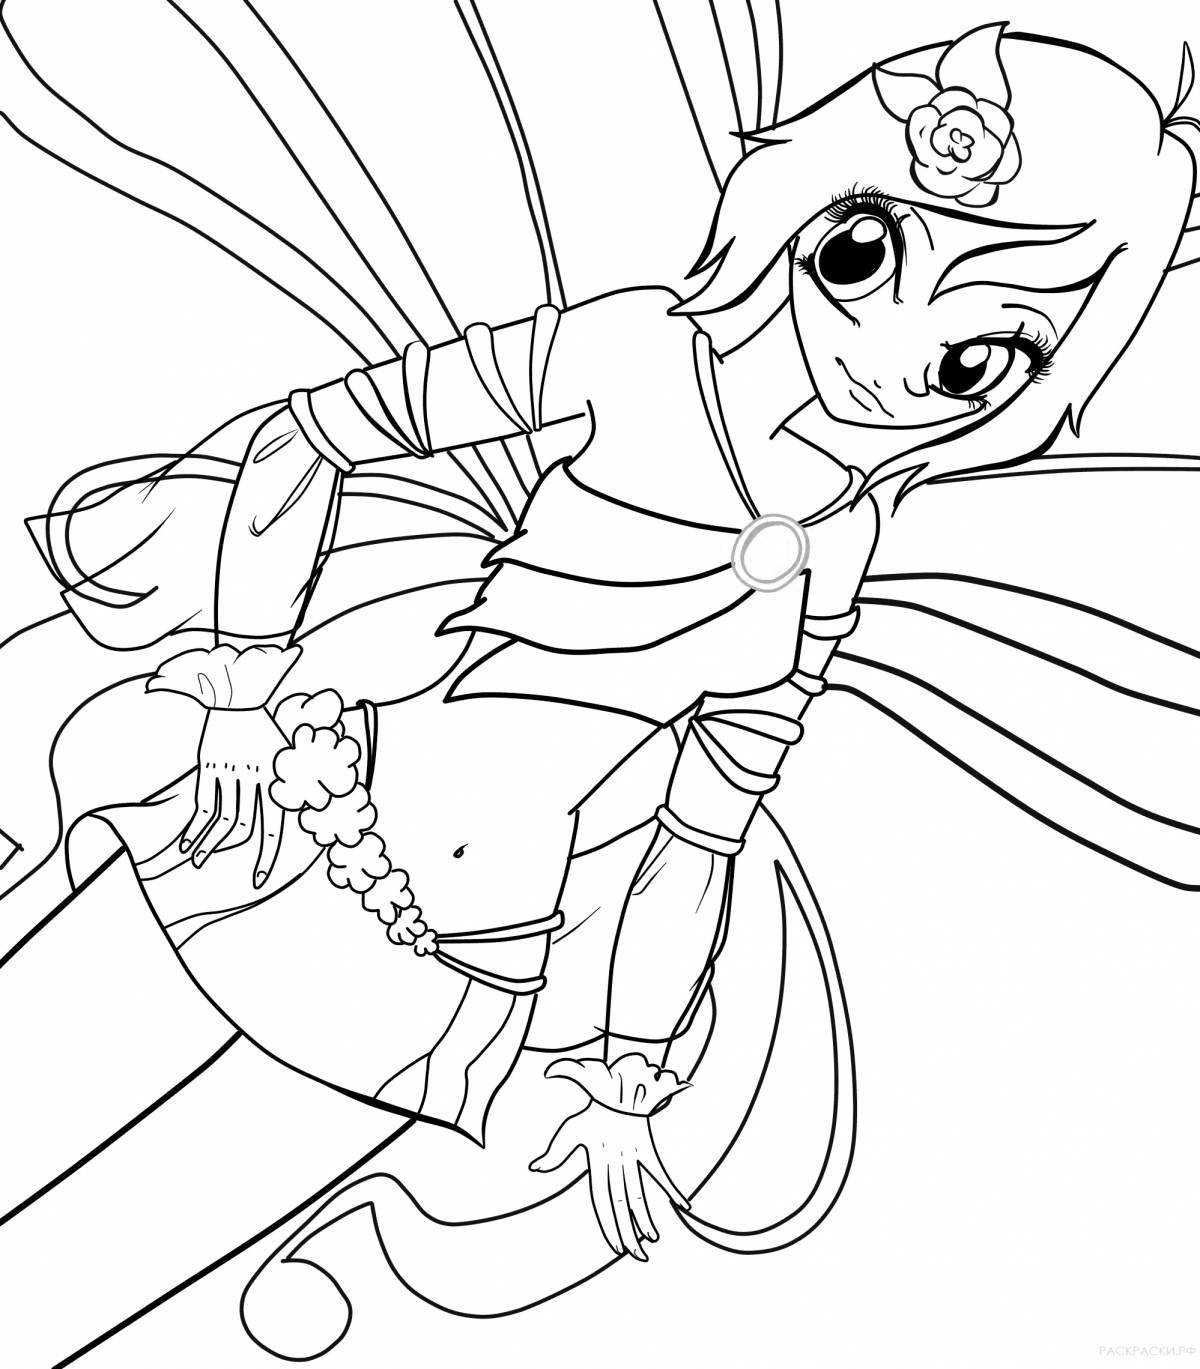 Elegant winx space coloring page